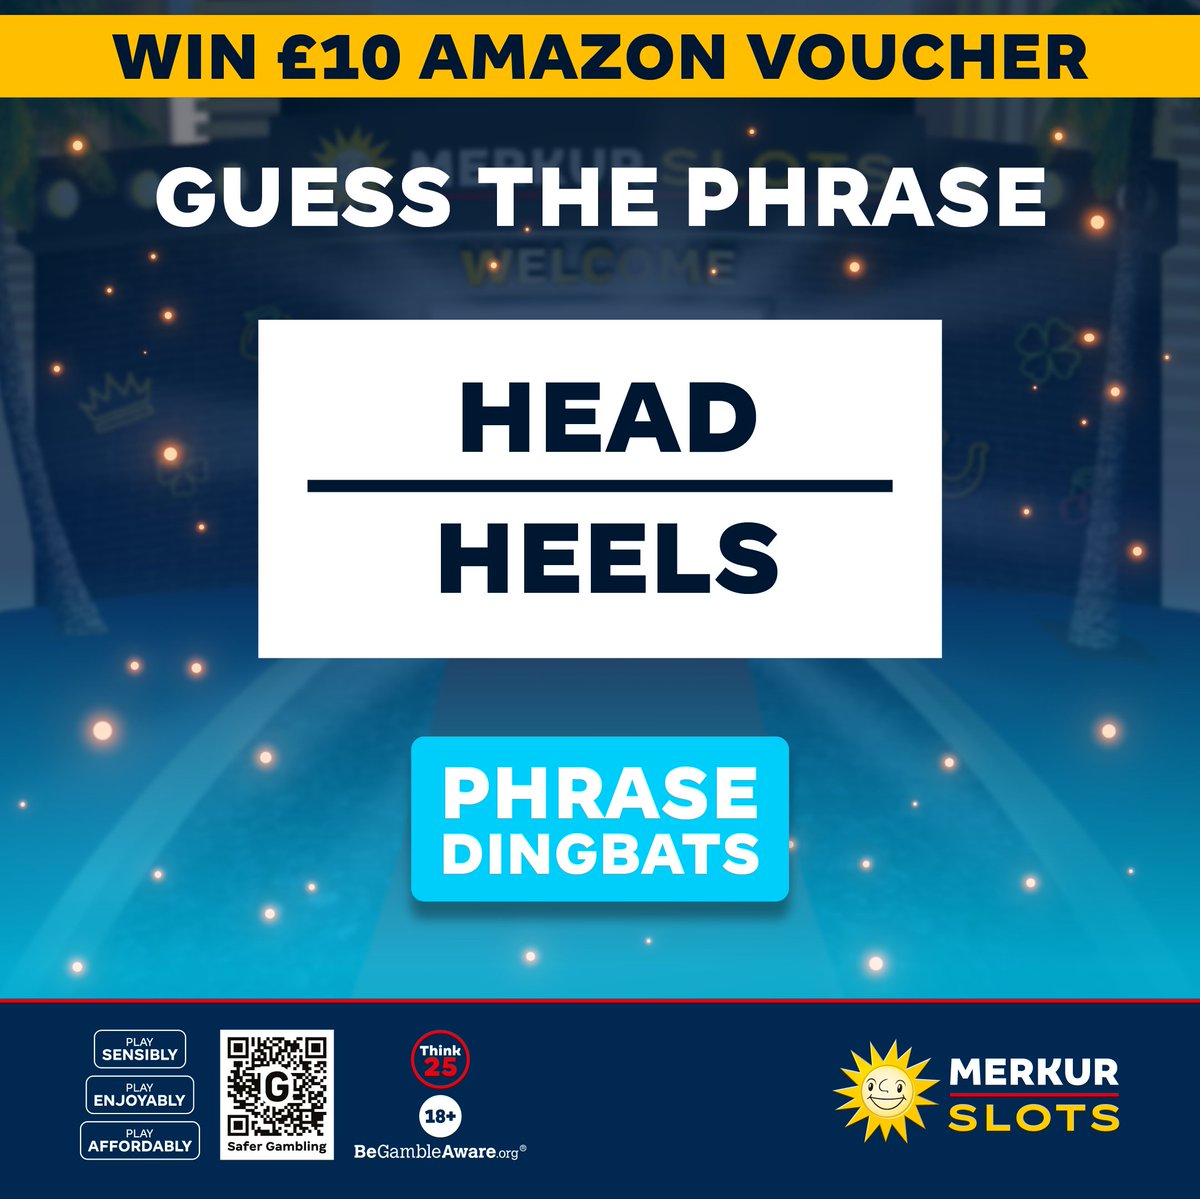 (18+, - BeGambleAware.org) Puzzle lovers, it's your time to shine! Can solve this dingbat?! 🕵️ Guess the answer correctly and you could be bagging a £10 AMAZON VOUCHER! 🤩🛍️ Leave your guess over on our Facebook page, entries close next Thursday. #MERKUR #WinitWednesday